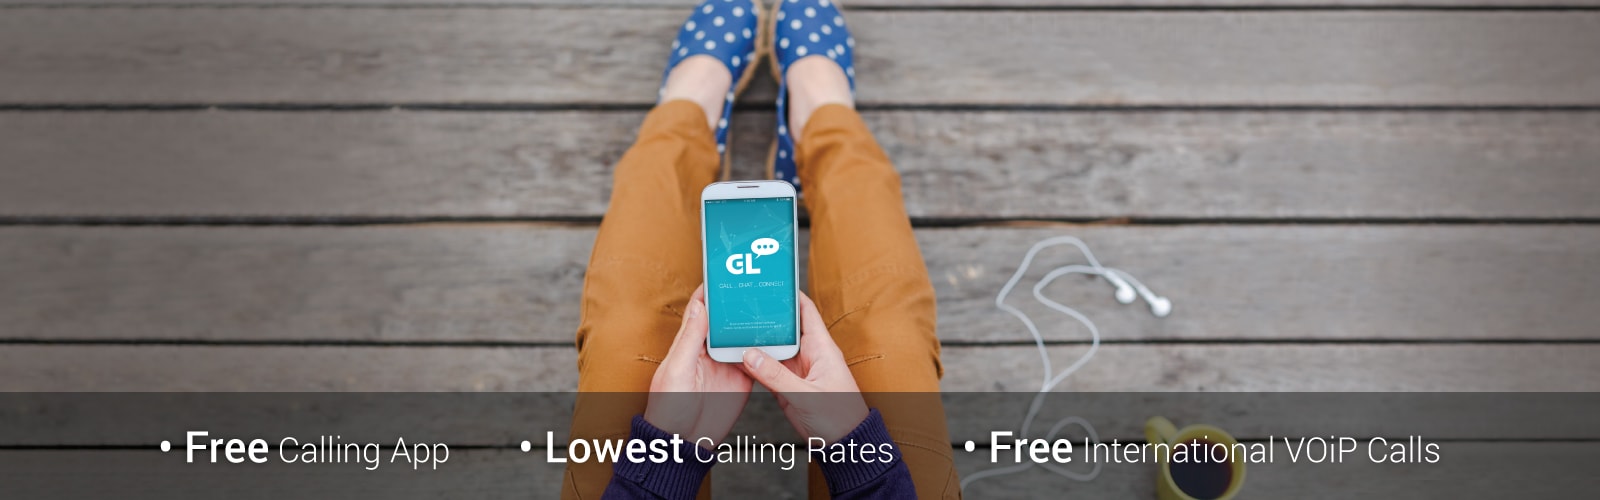 Free Calling App.Lowest Calling Rates.Free International VOiP Calls.